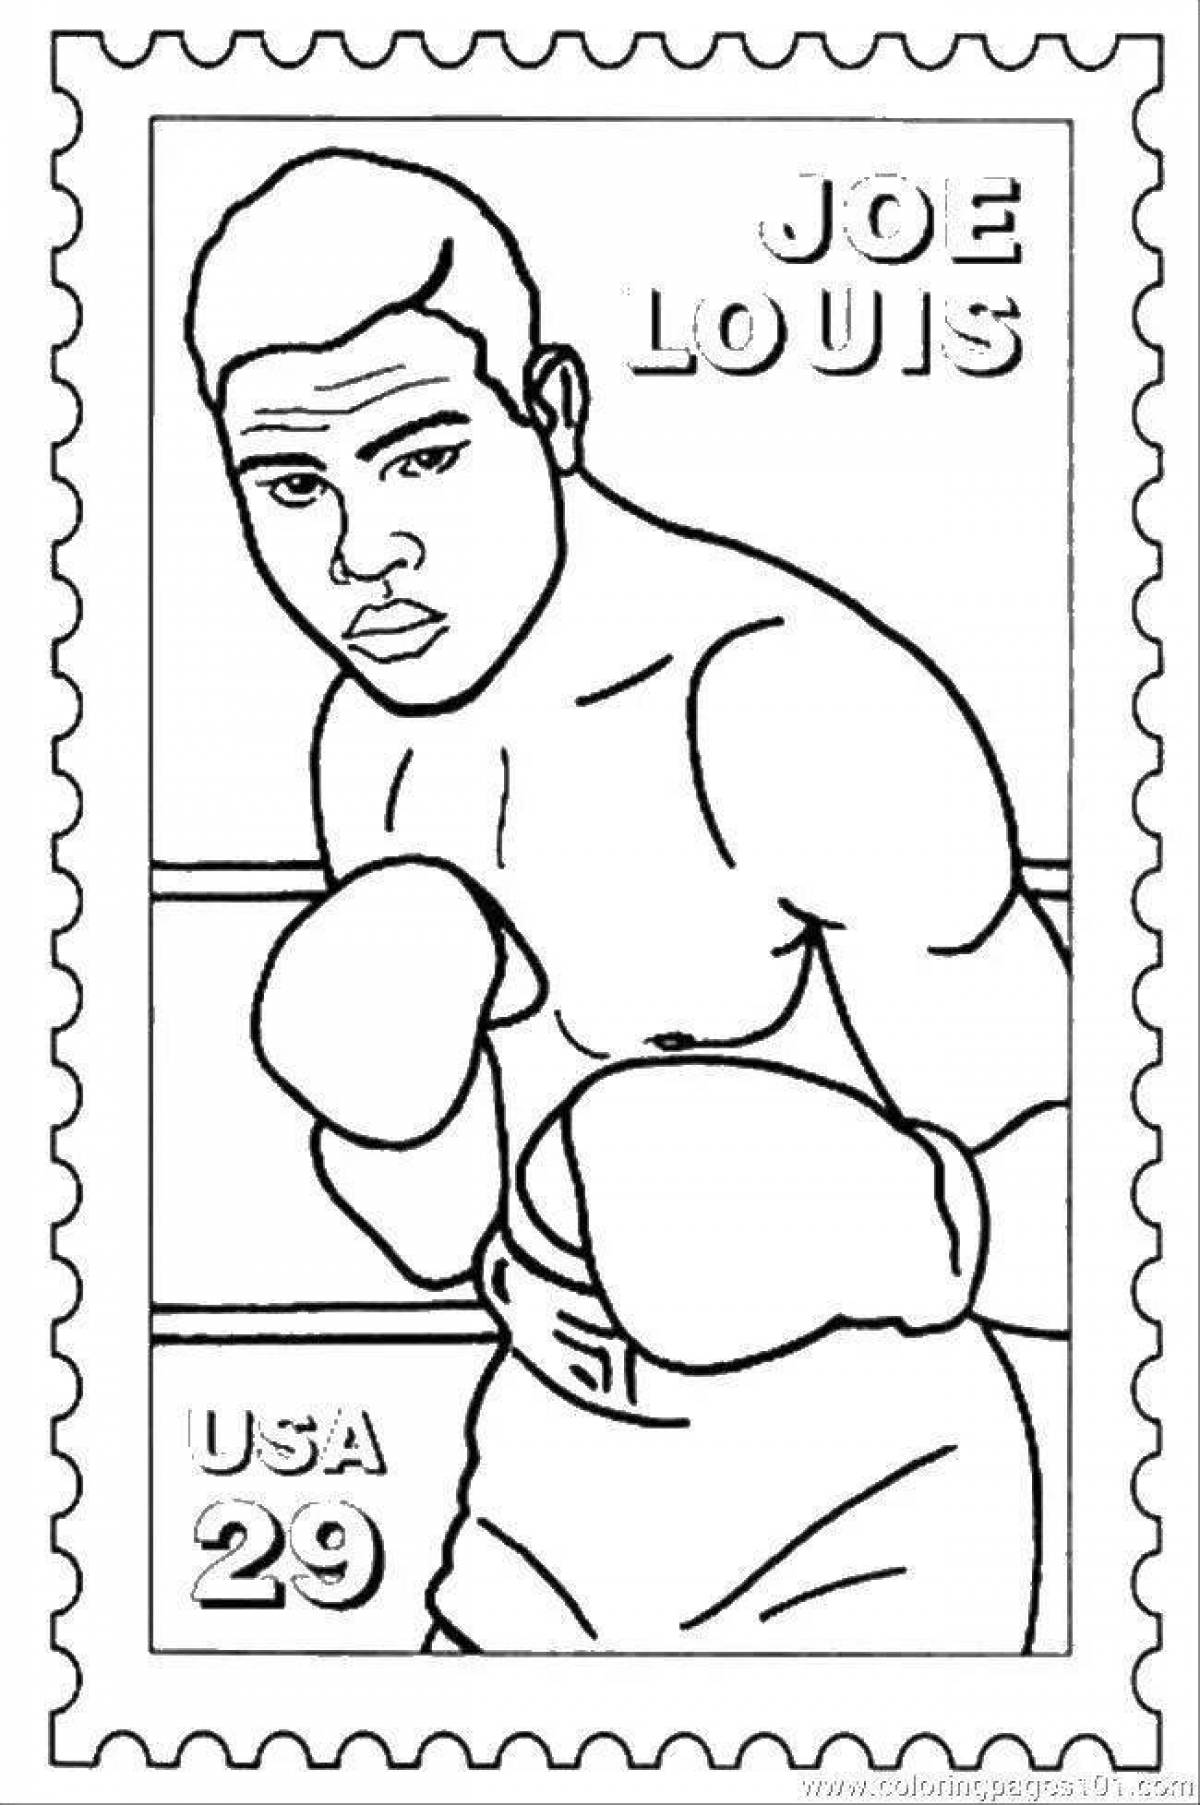 Boxer coloring page